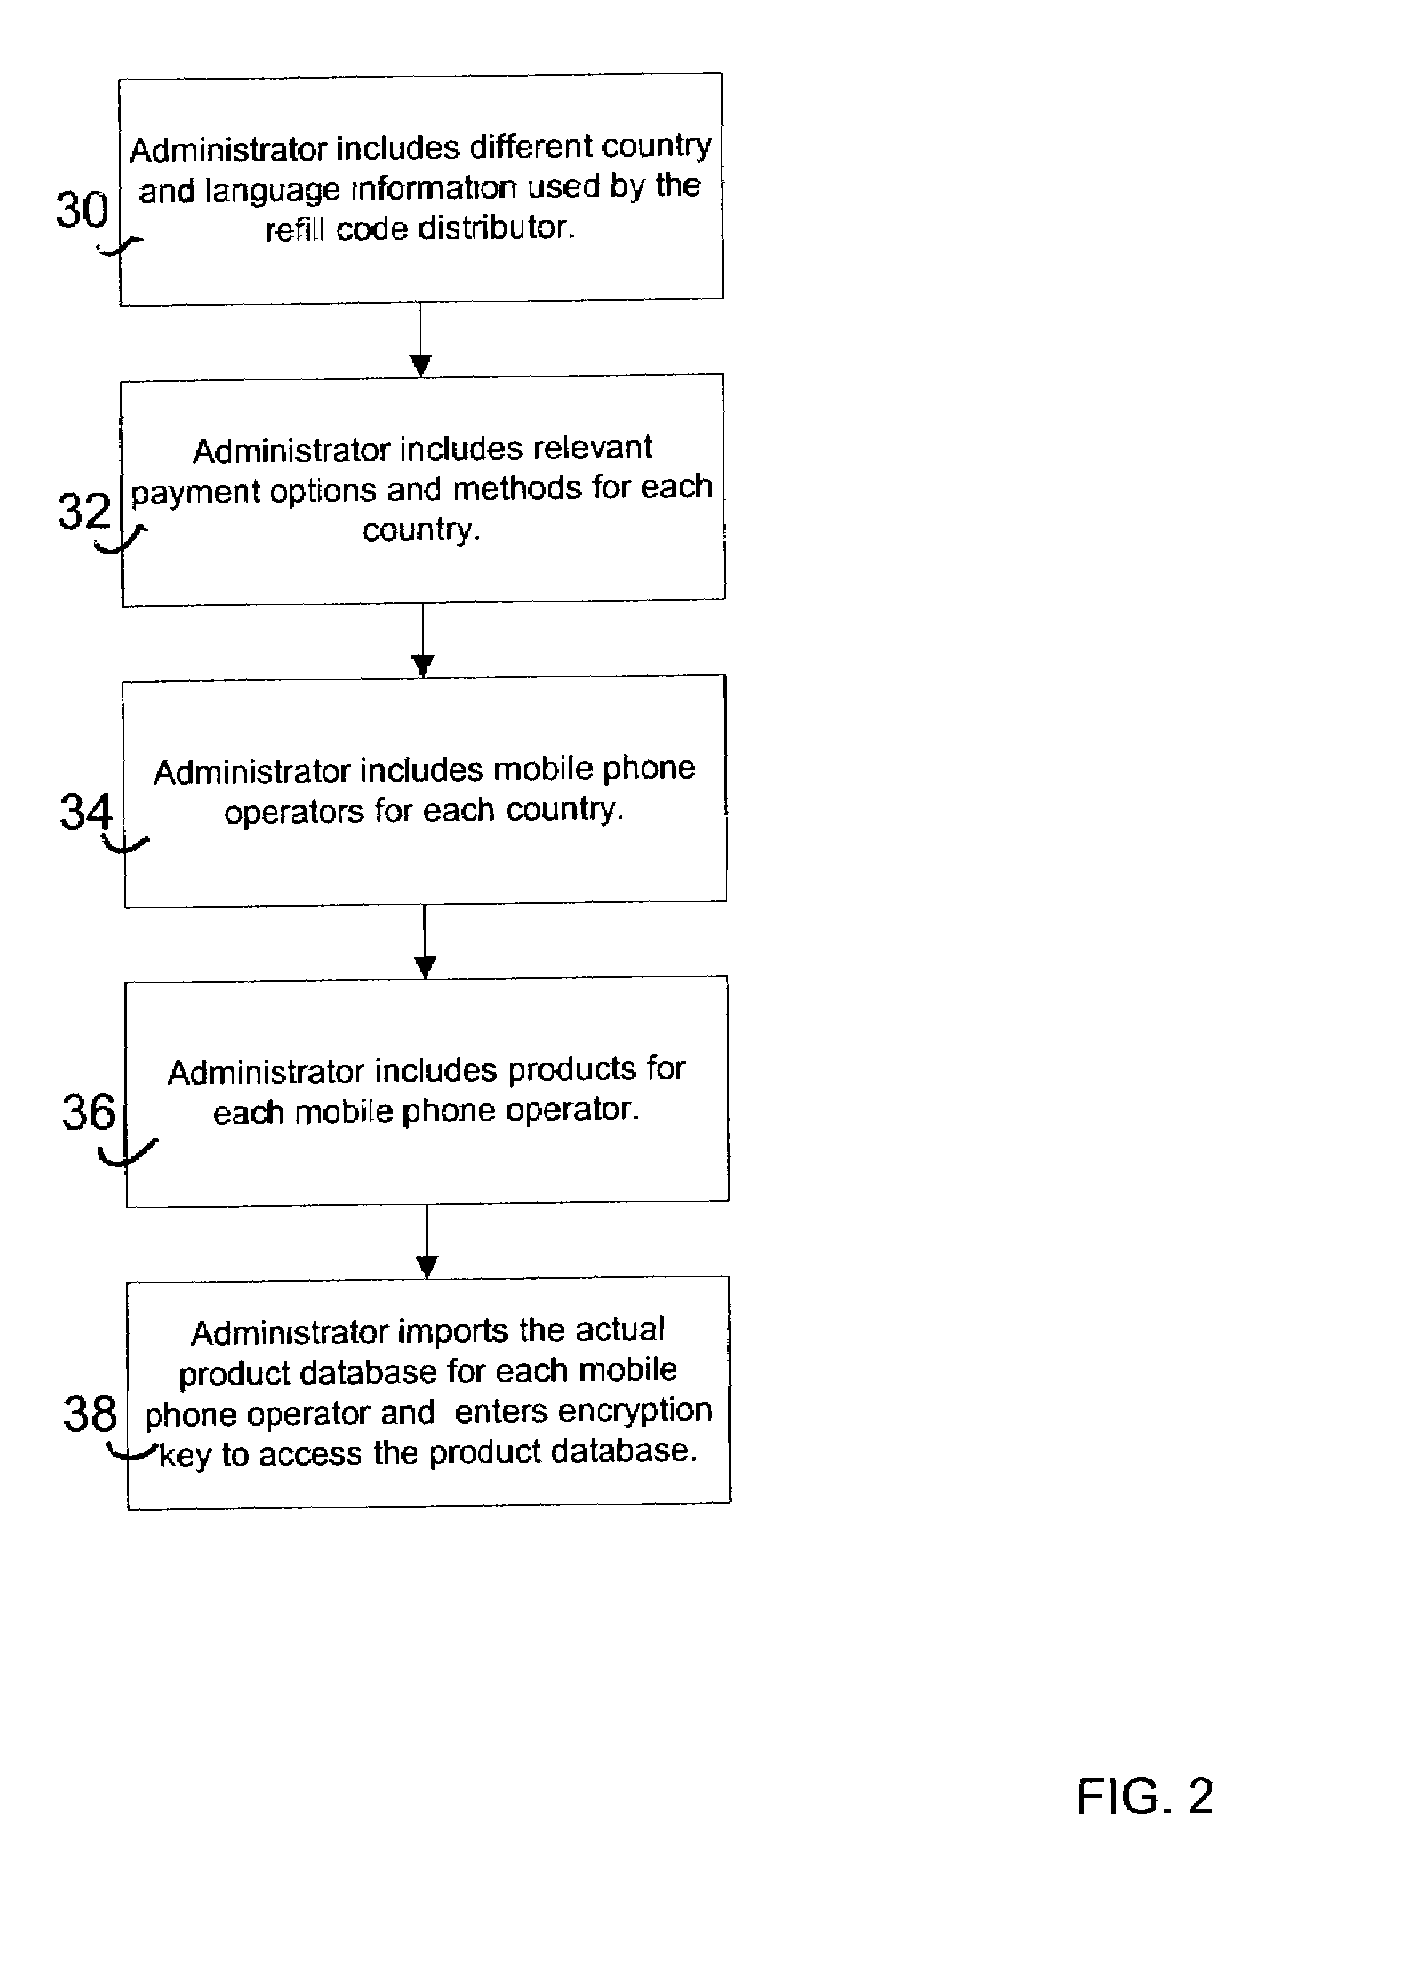 Method and system for refilling mobile telephone prepaid phone cards via electronic distribution of refill codes